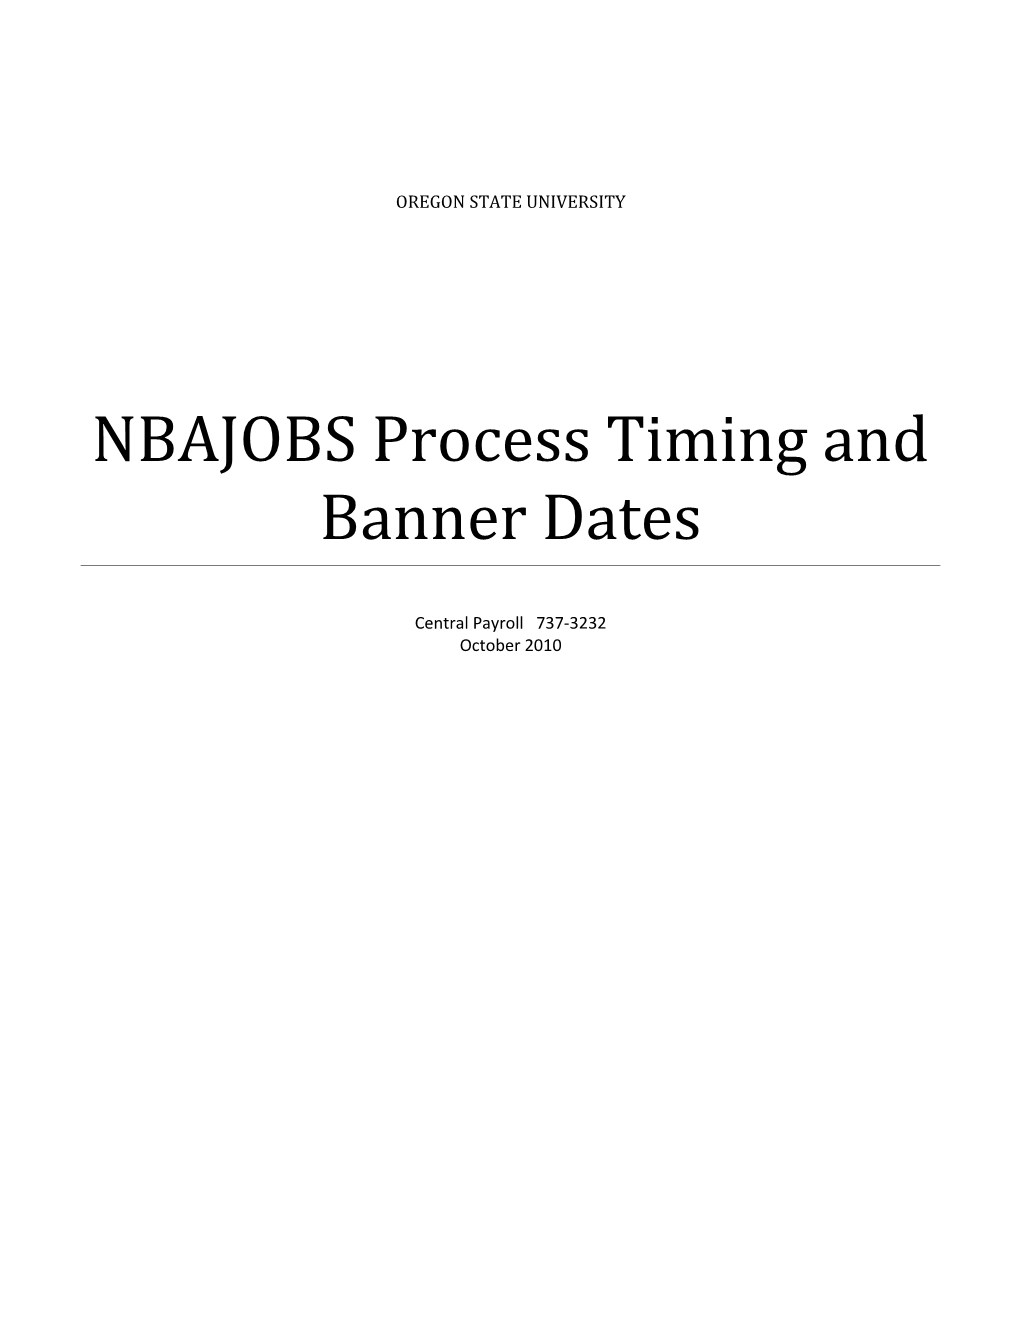 NBAJOBS Process Timing and Banner Dates